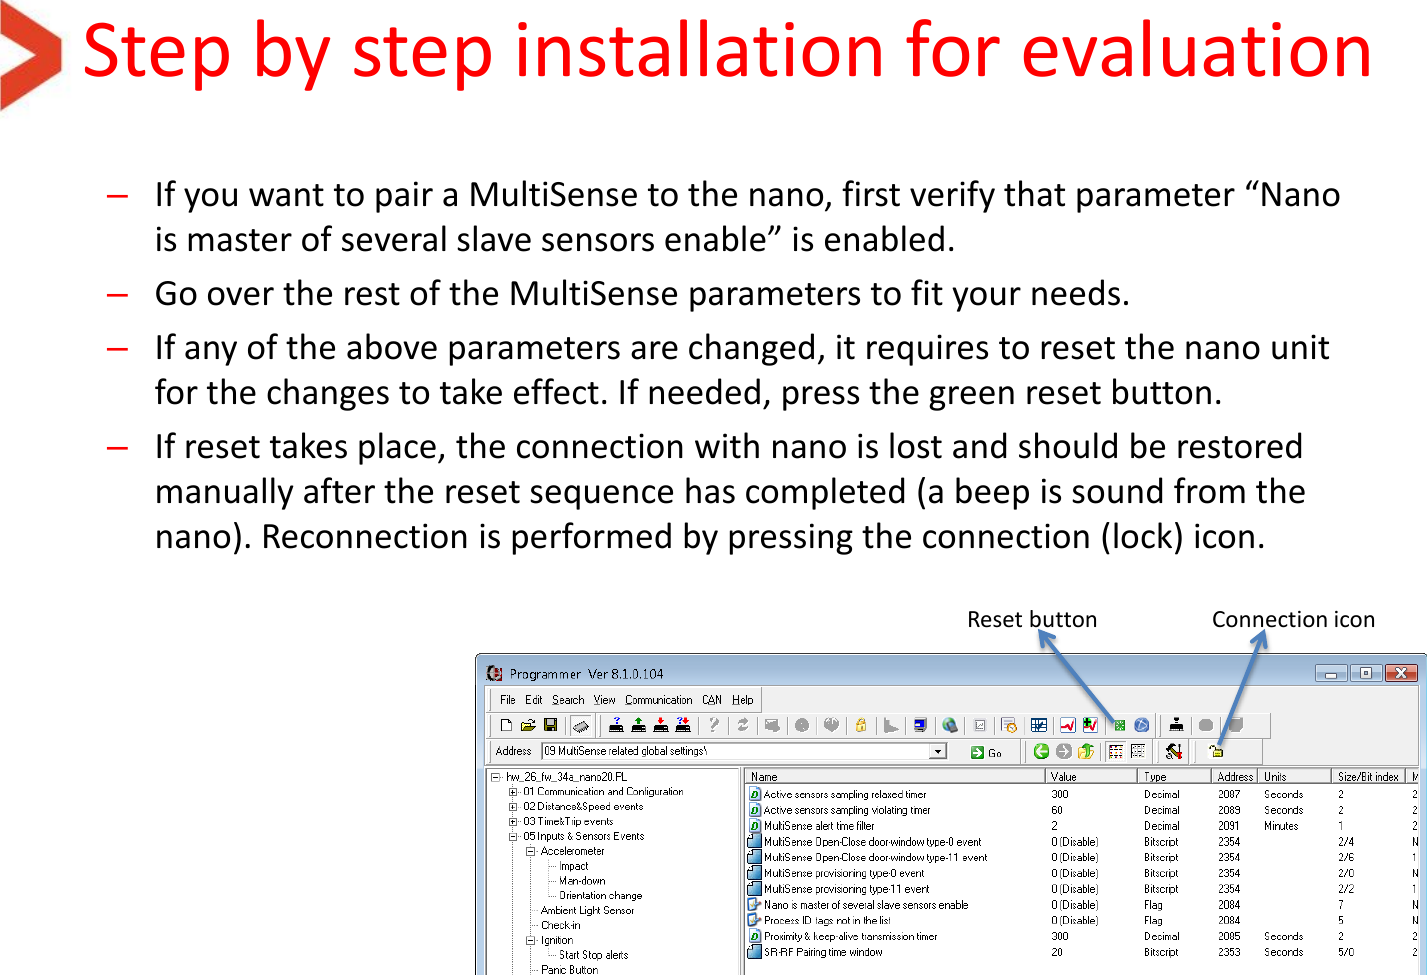 Step by step installation for evaluation –If you want to pair a MultiSense to the nano, first verify that parameter “Nano is master of several slave sensors enable” is enabled.  –Go over the rest of the MultiSense parameters to fit your needs. –If any of the above parameters are changed, it requires to reset the nano unit for the changes to take effect. If needed, press the green reset button. –If reset takes place, the connection with nano is lost and should be restored manually after the reset sequence has completed (a beep is sound from the nano). Reconnection is performed by pressing the connection (lock) icon. Reset button  Connection icon 